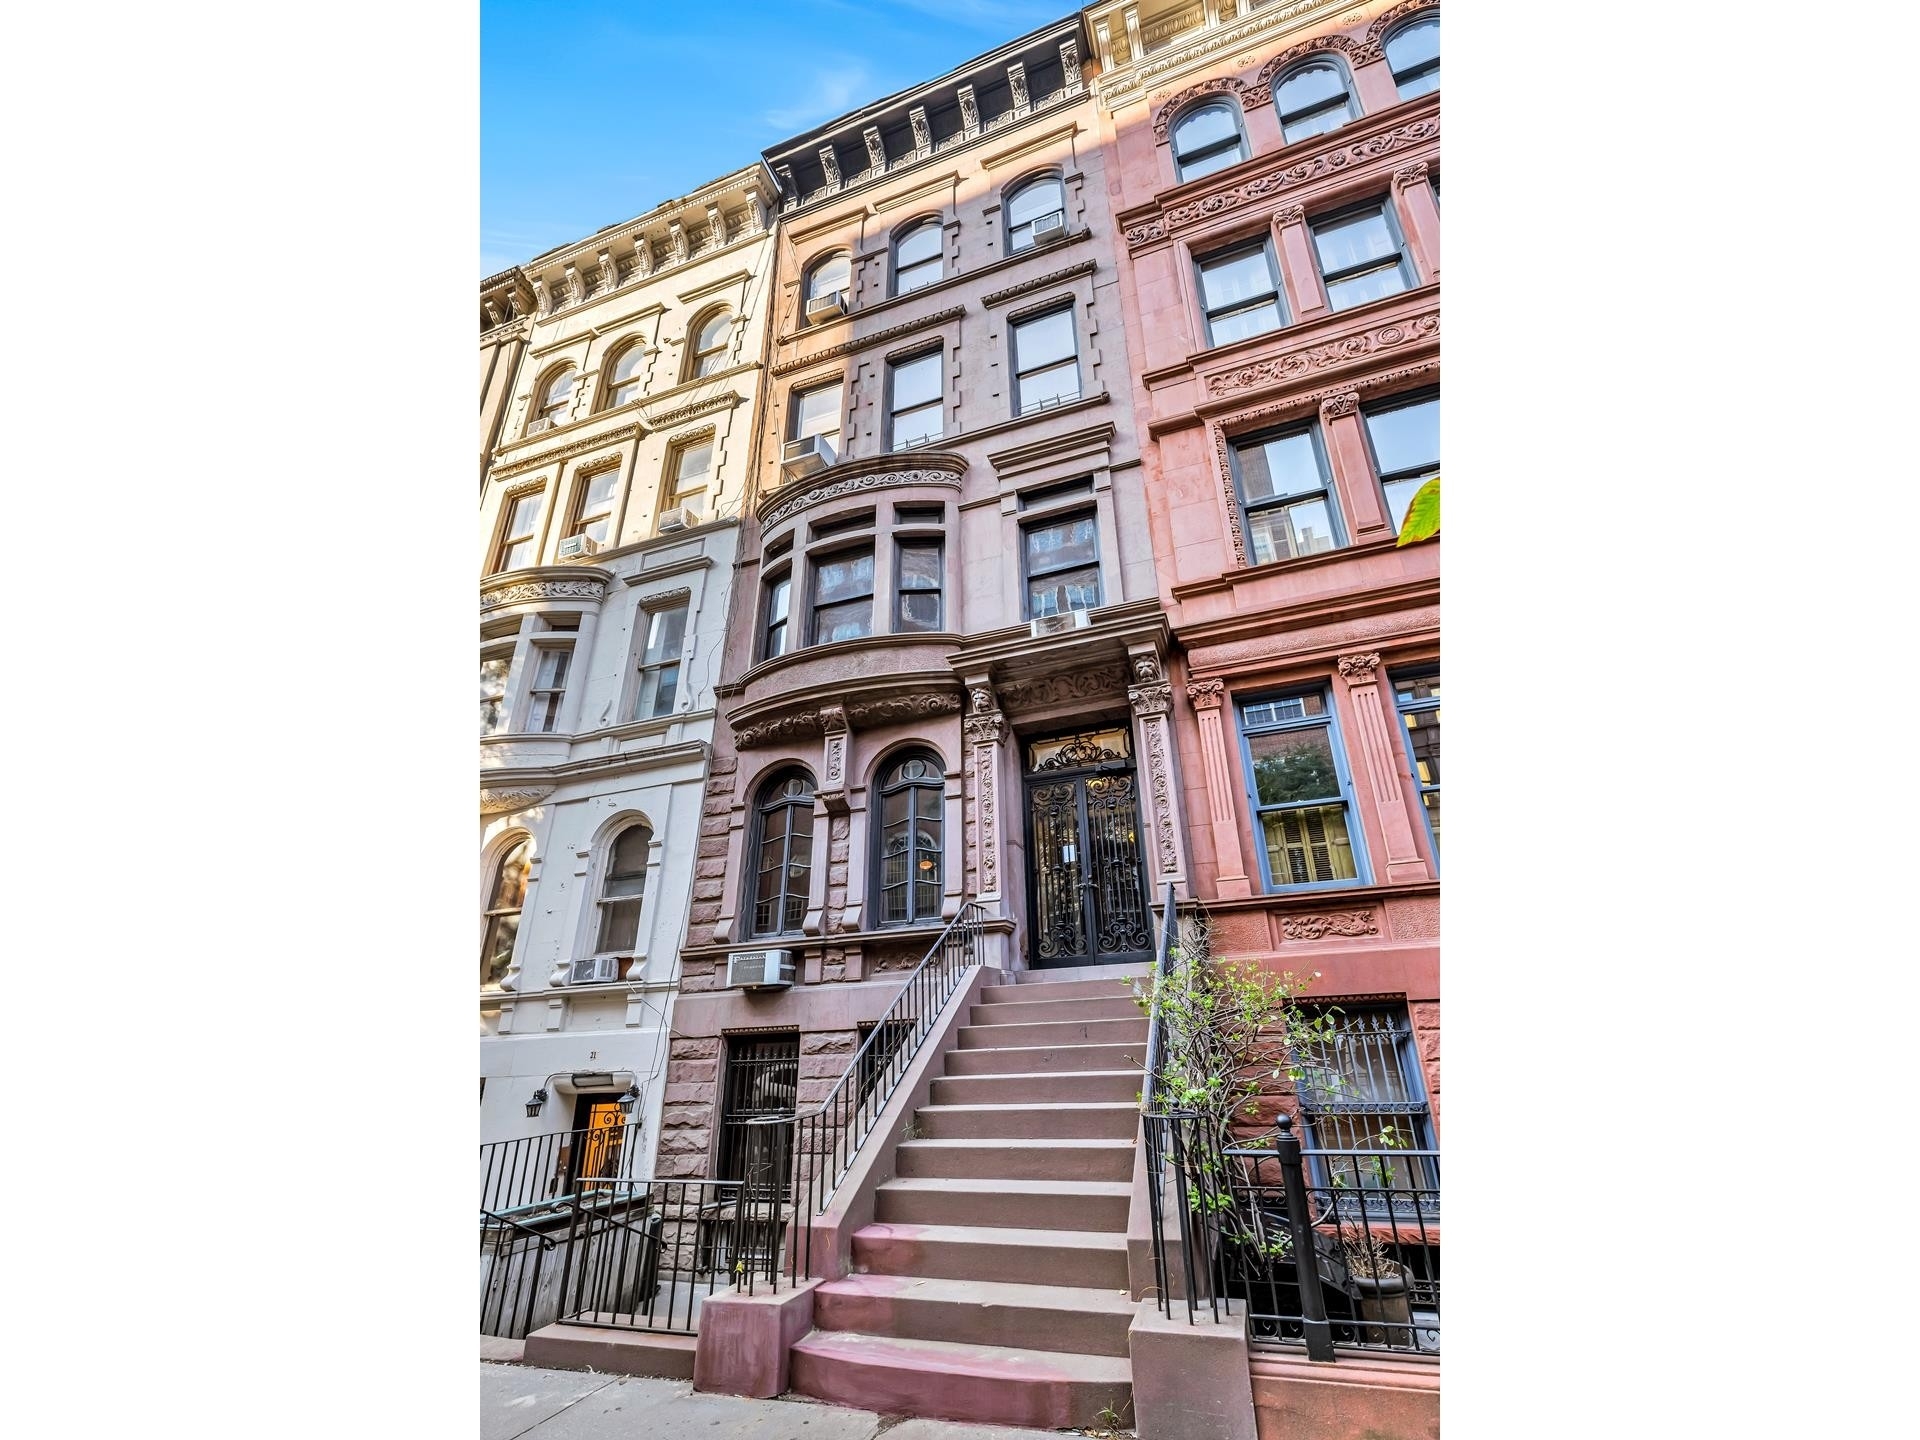 Multi Family Townhouse for Sale at 23 E 92ND ST, TOWNHOUSE Carnegie Hill, New York, New York 10128